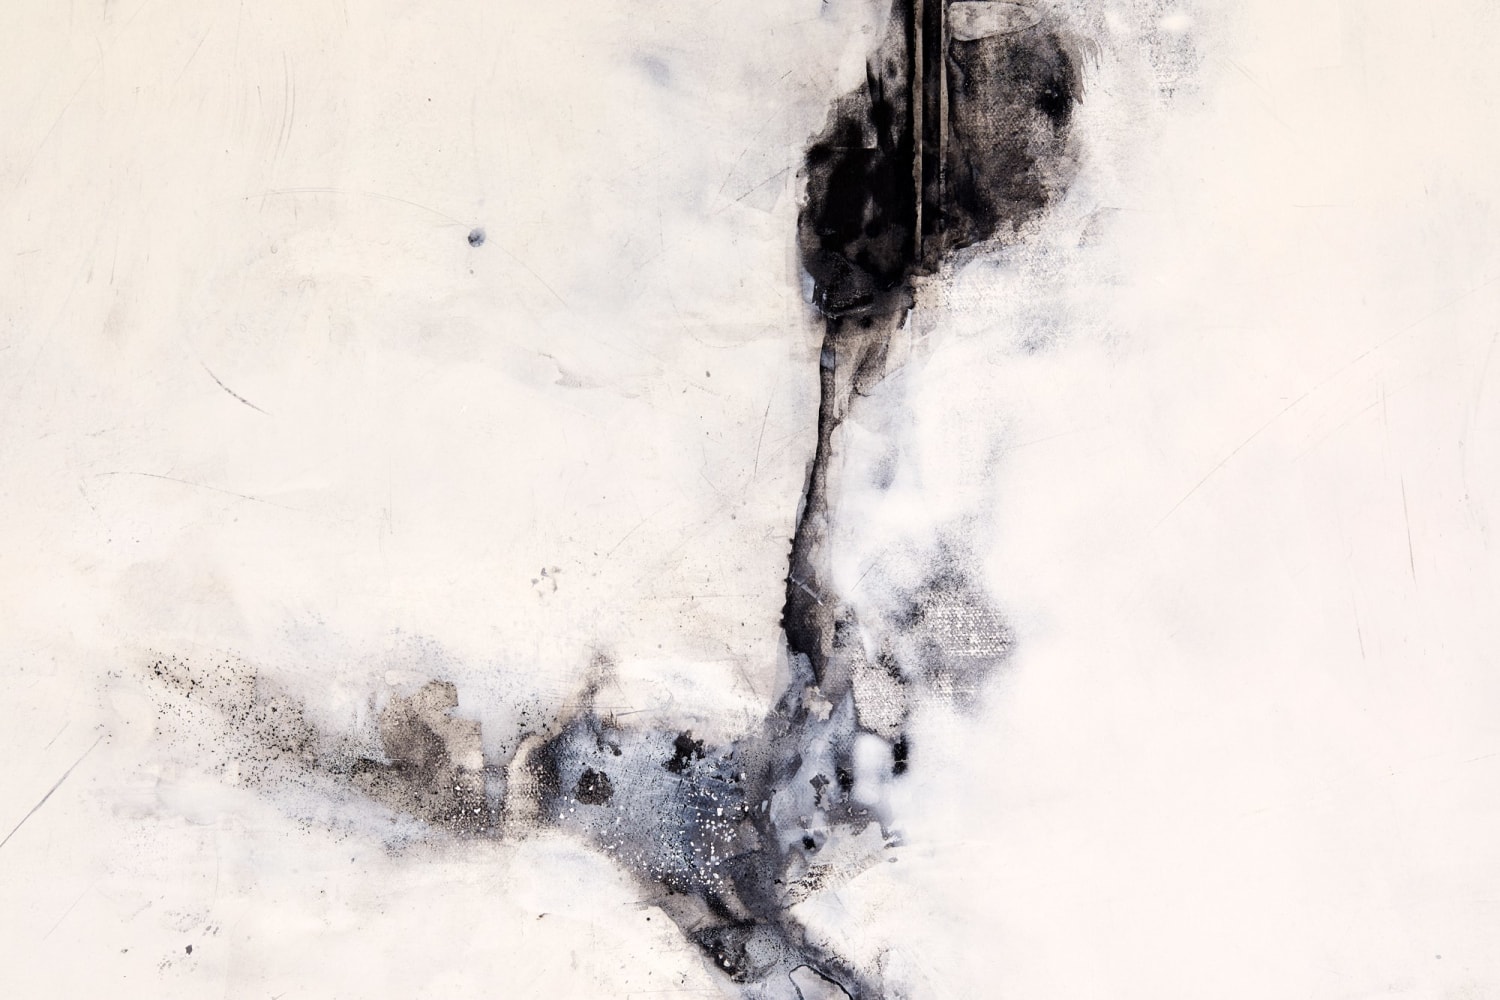 Andrew Wapinski
Untitled XV (detail), 2022
Anthracite Coal, Pigmented Ice, Acrylic, &amp;amp; Ink on Linen Mounted Panel
50h x 70w x 2.50d in
SOLD